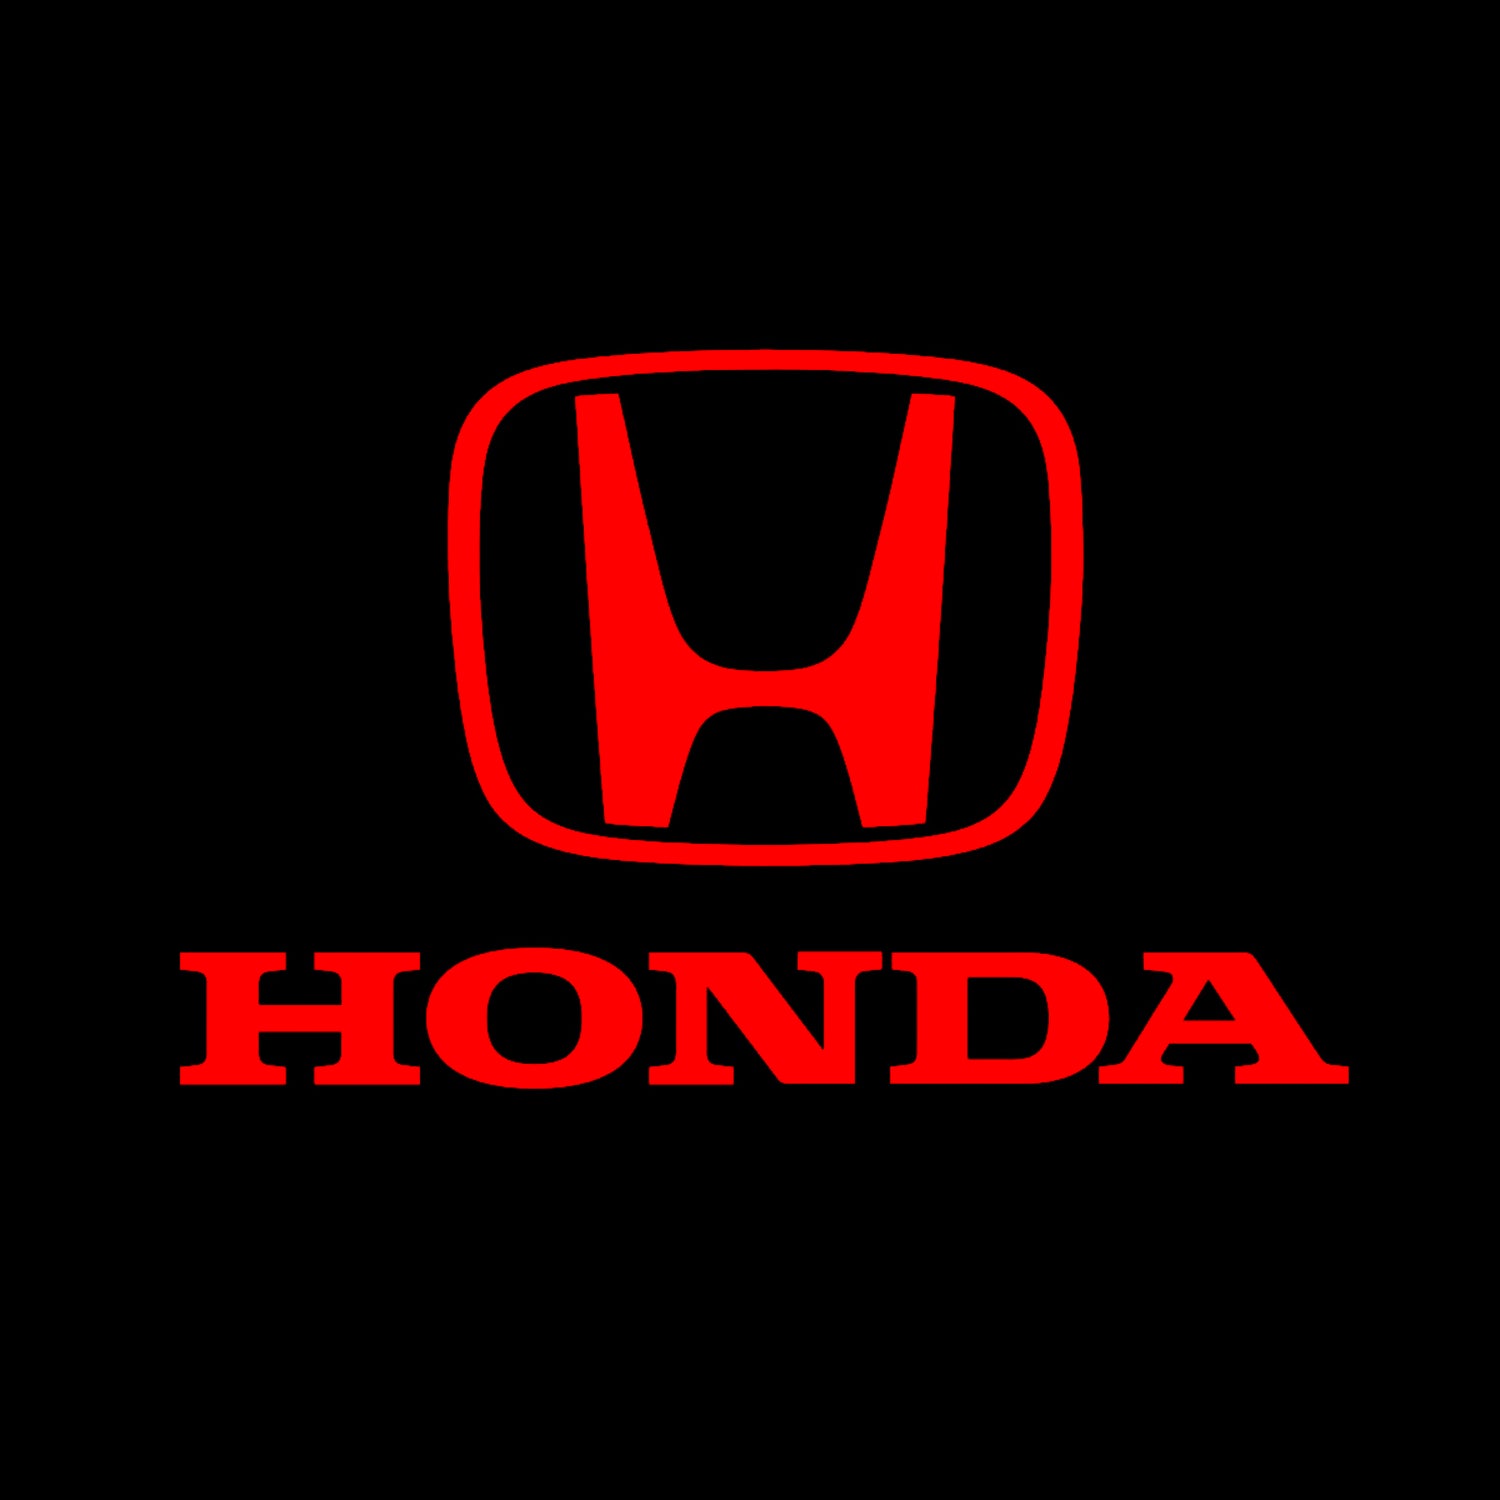 Honda logo in red with black background